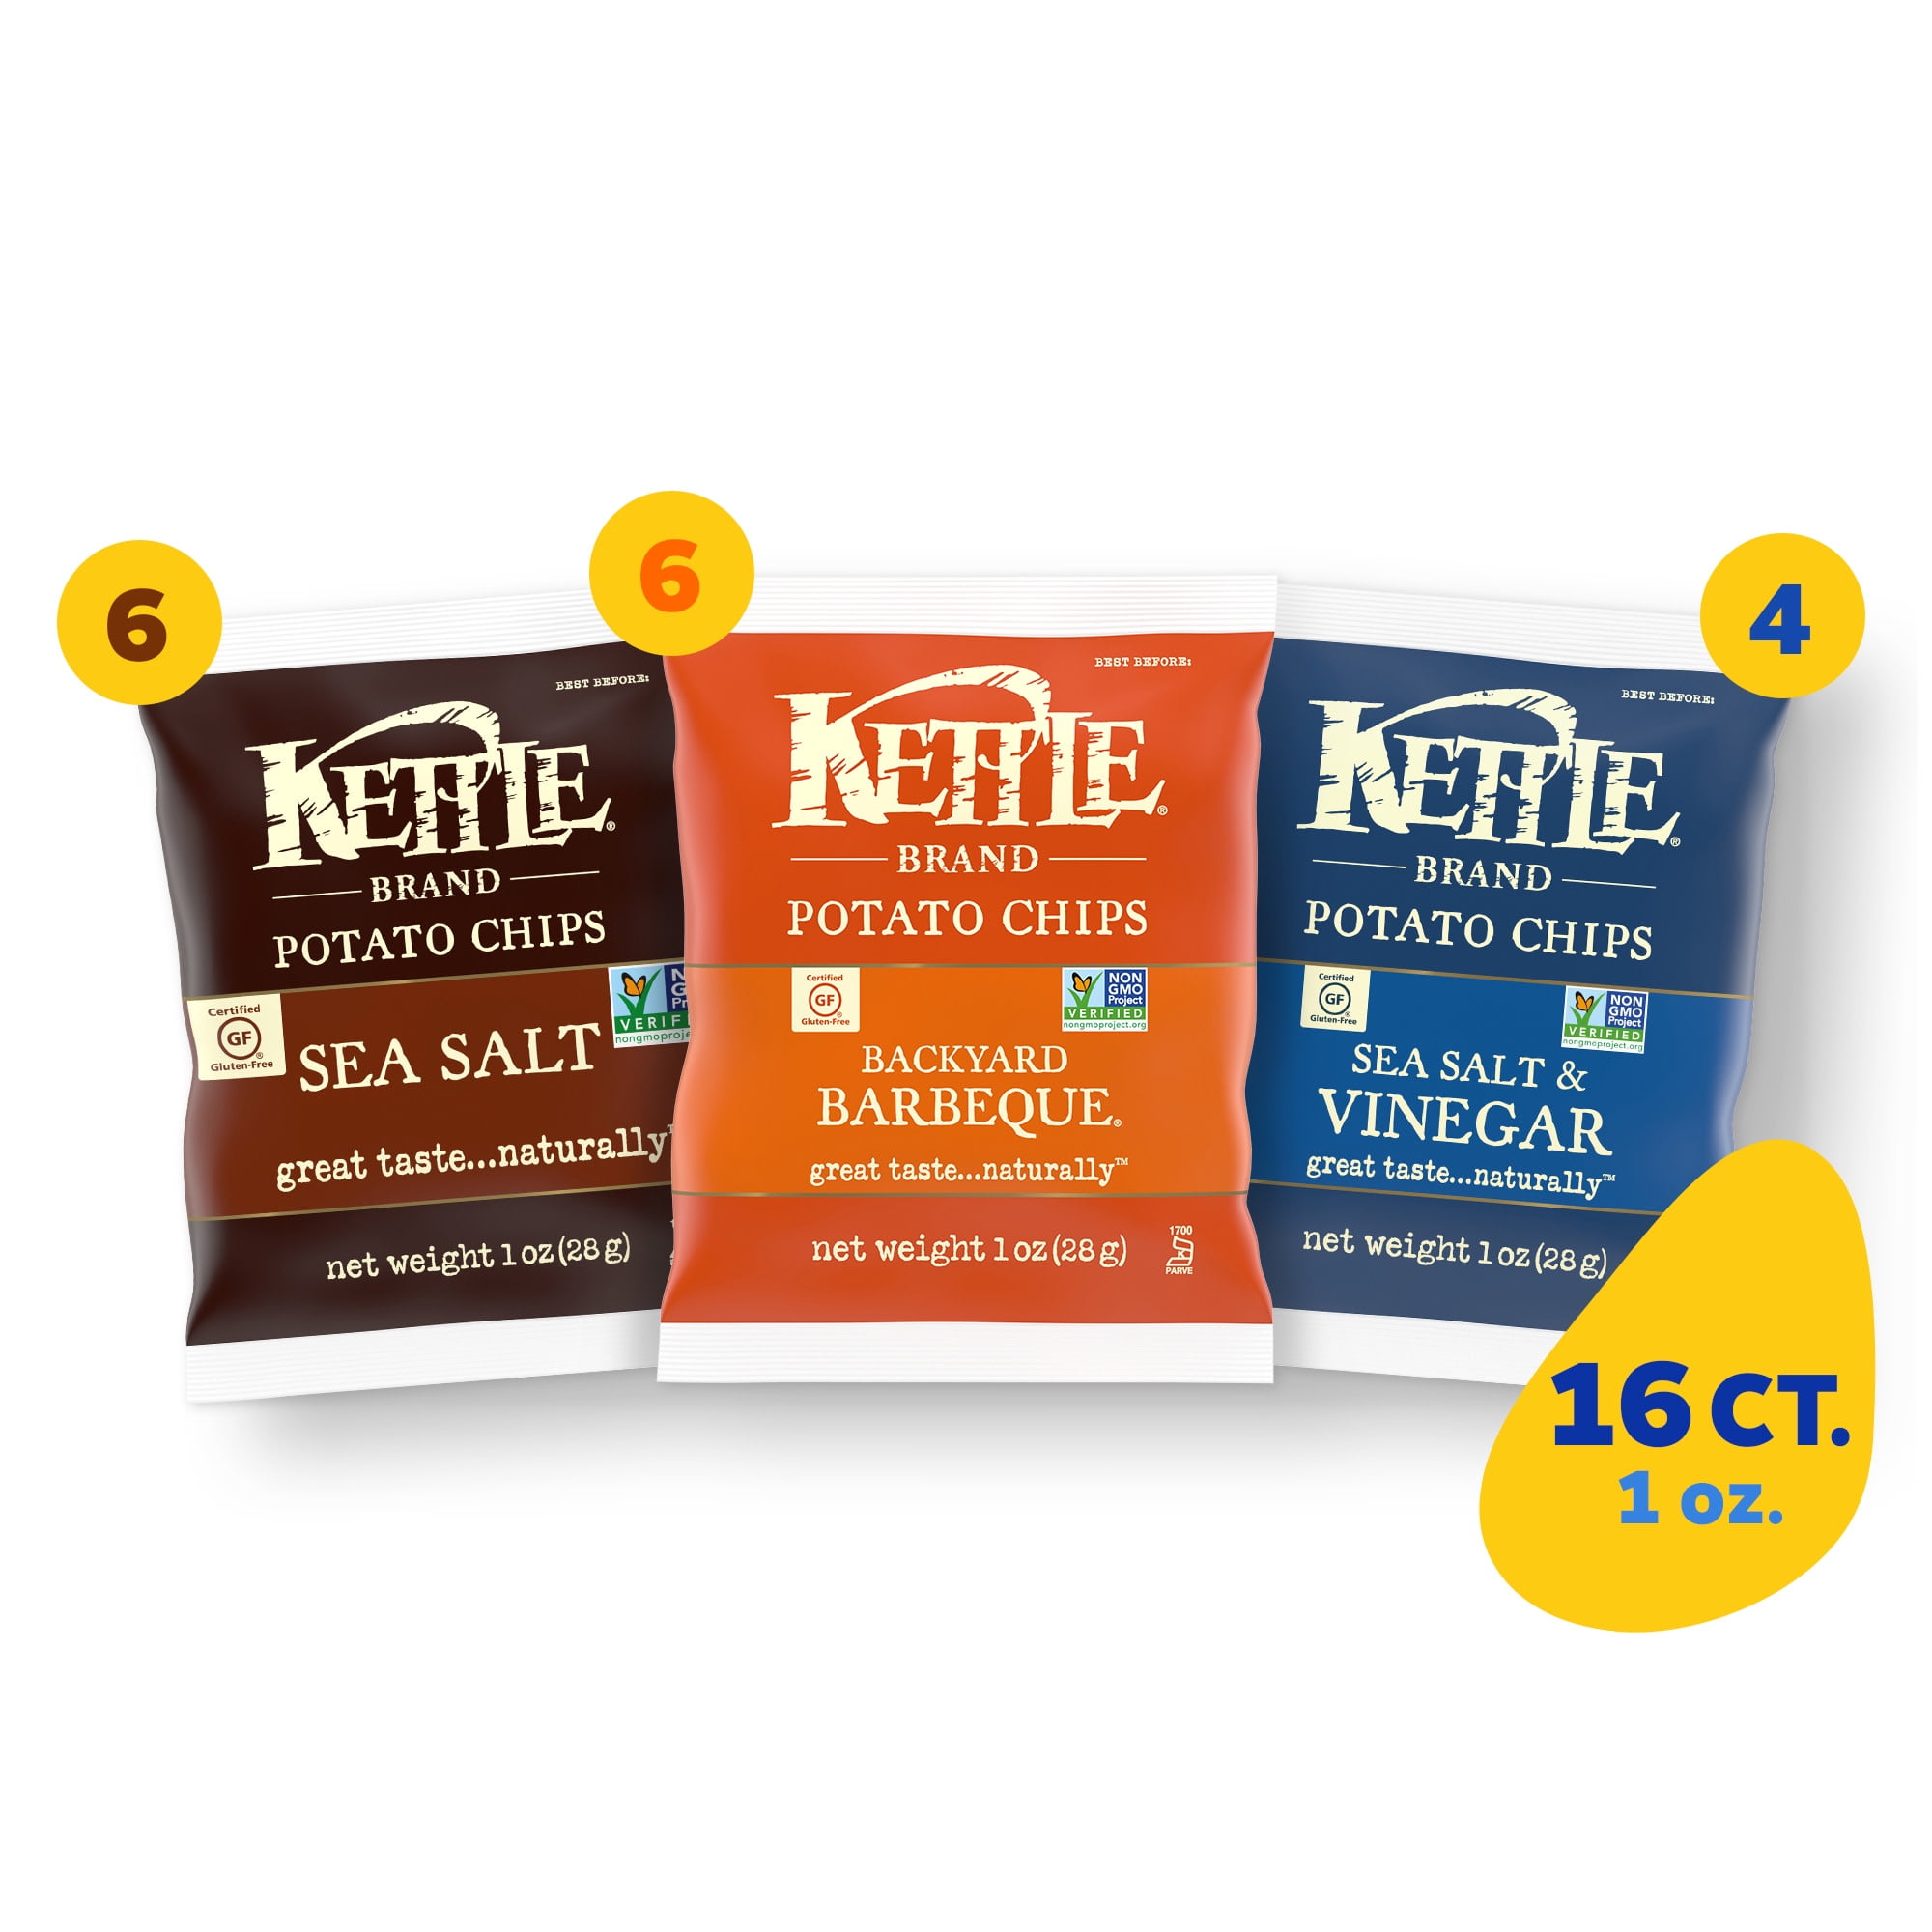 Kettle® Brand Favorite Flavors Kettle Chips Variety Pack, 16 ct